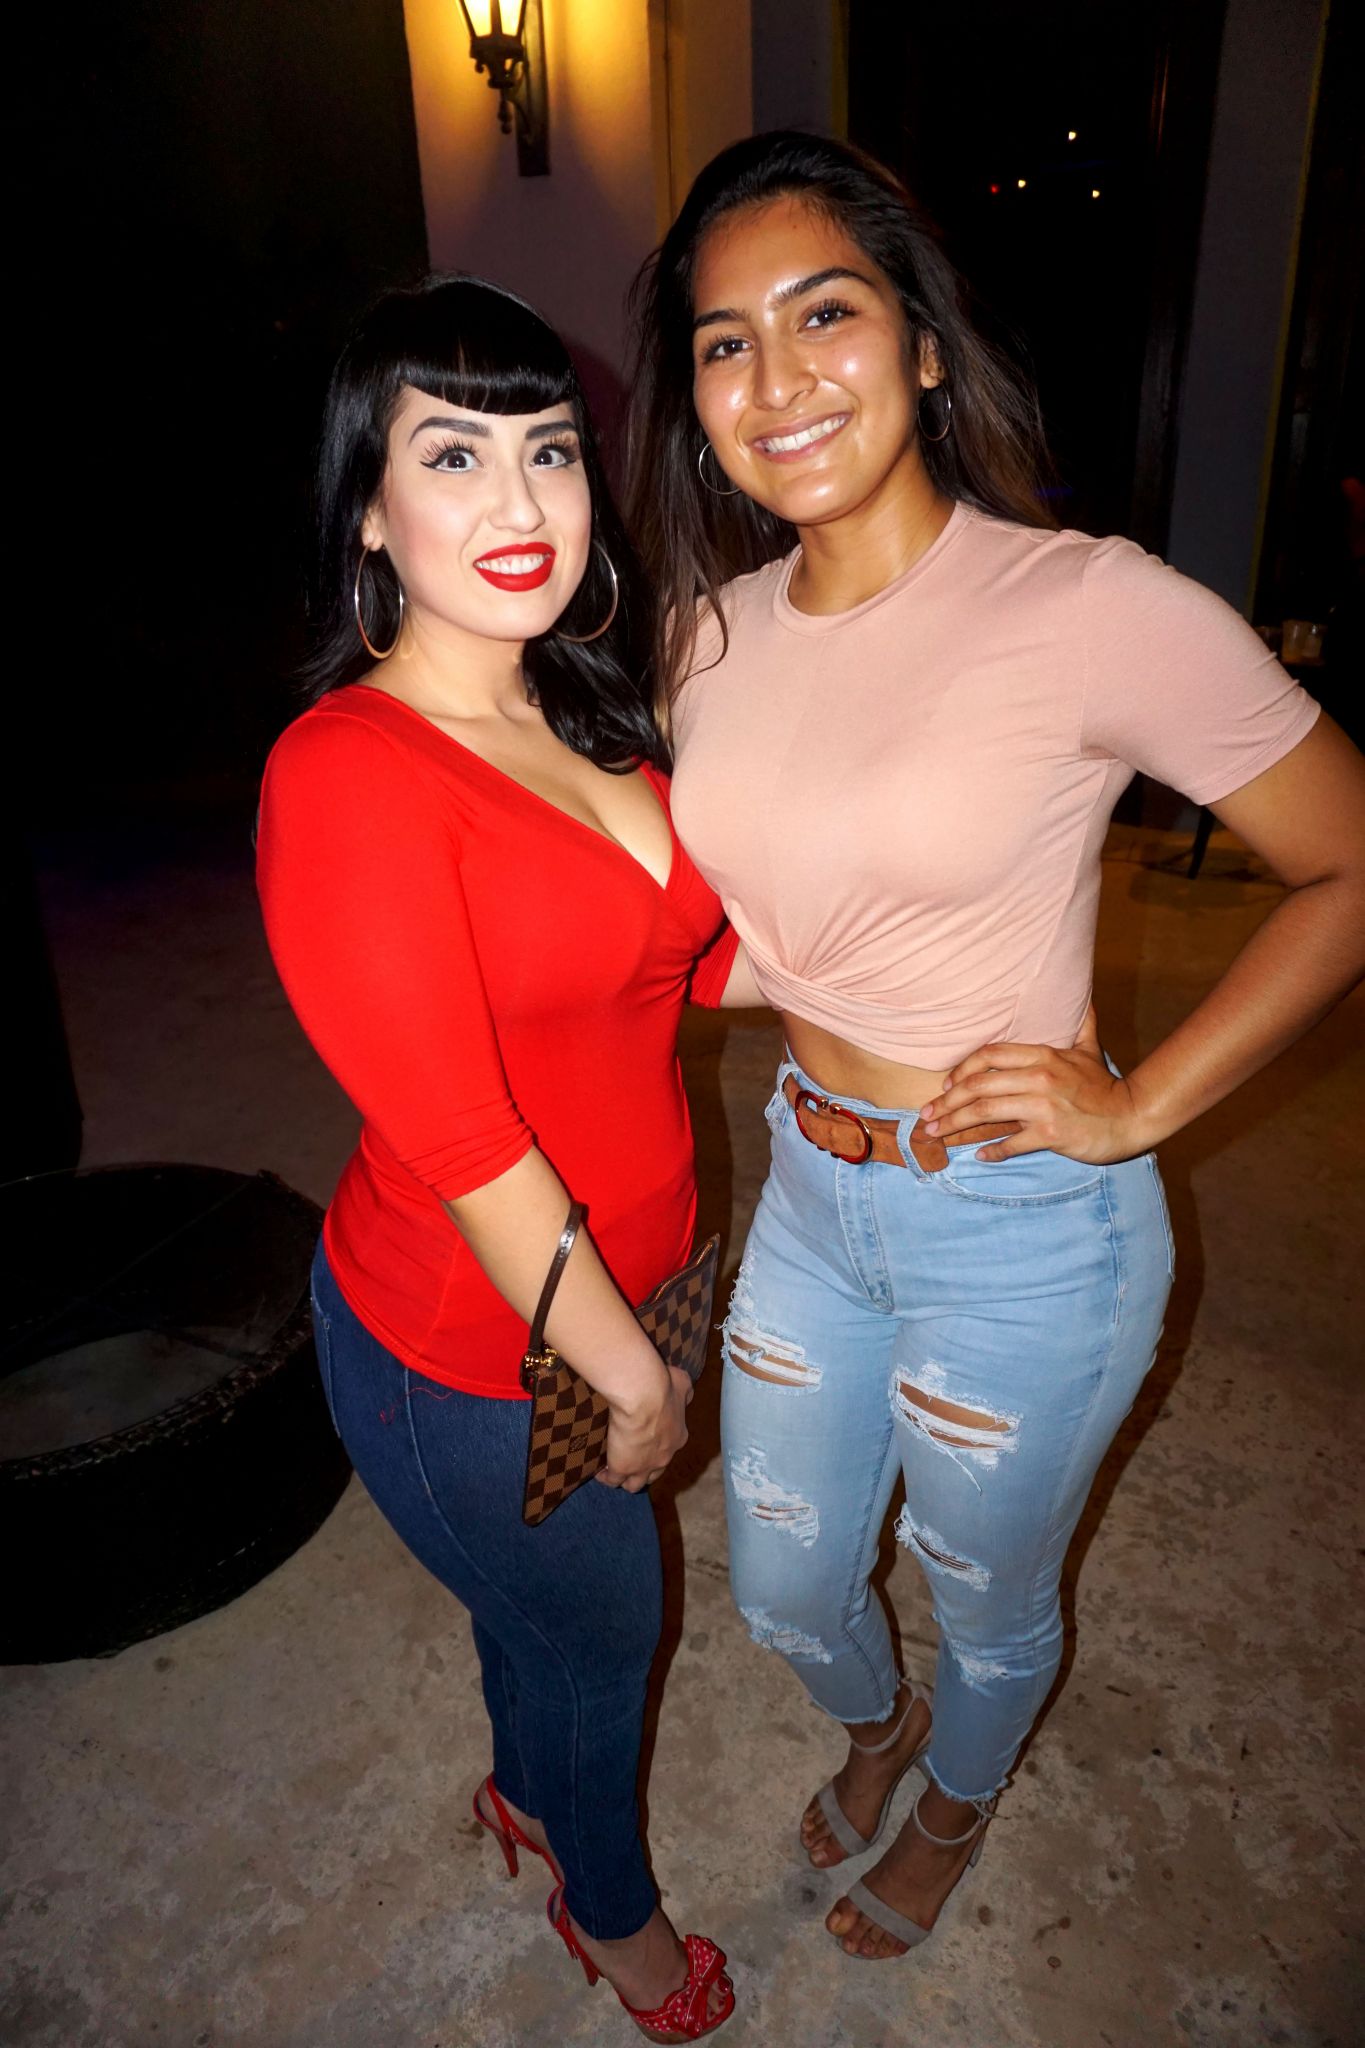 Photos: Border nightlife comes alive throughout the Gateway City